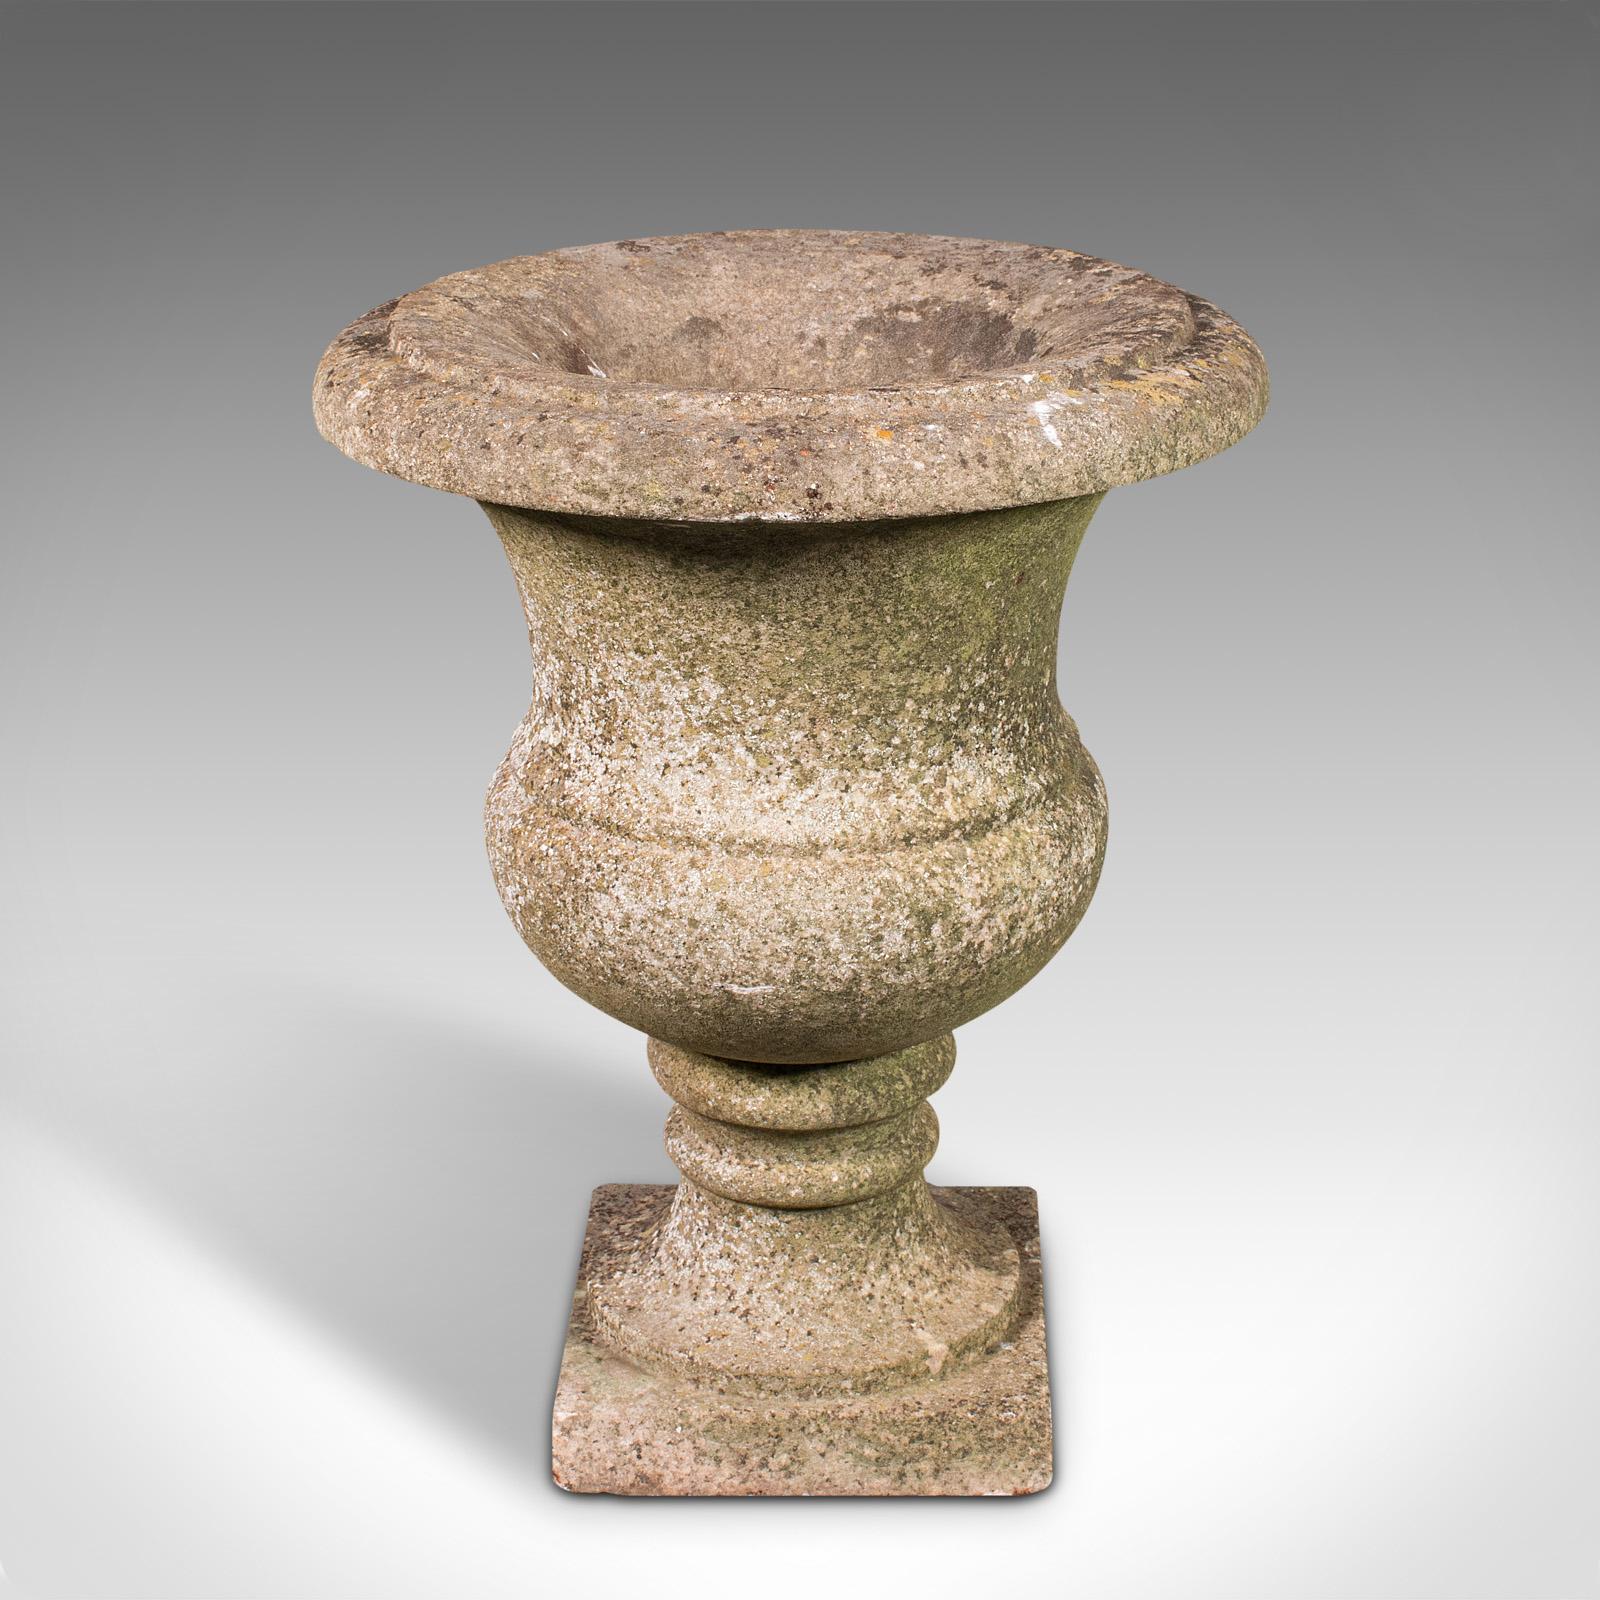 This is an antique weathered planting urn. An English, marble decorative jardiniere, dating to the Victorian period, circa 1870.

Traditional appeal with a pleasingly weathered finish
Displays a desirable aged patina with a light covering of